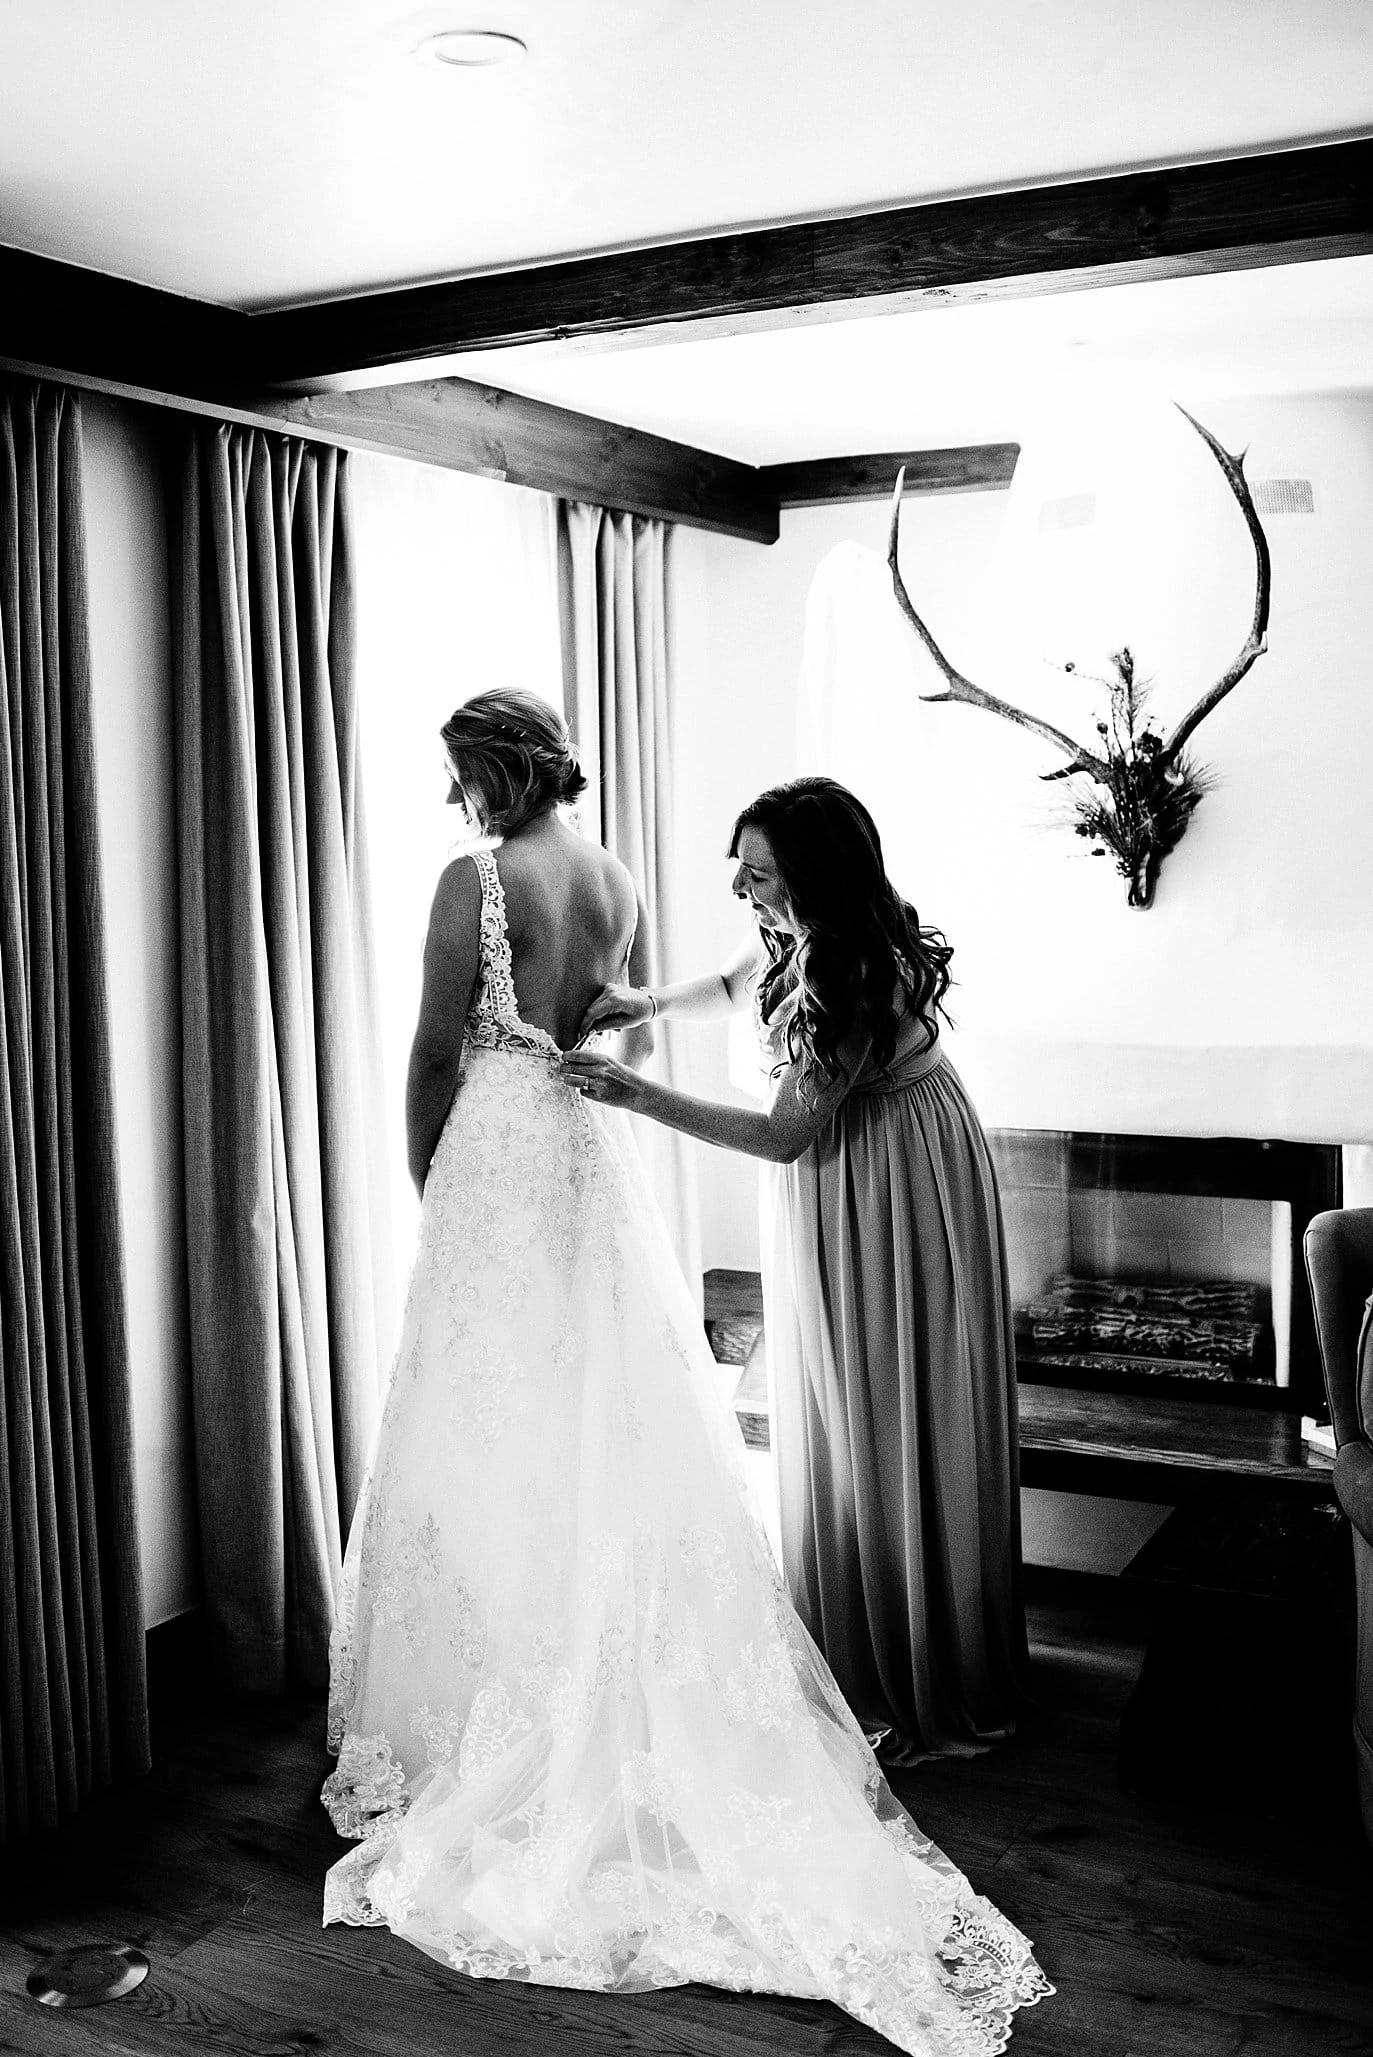 Bride getting dressed by window at Sonnenalp Hotel by Eagle wedding photographer Jennie Crate